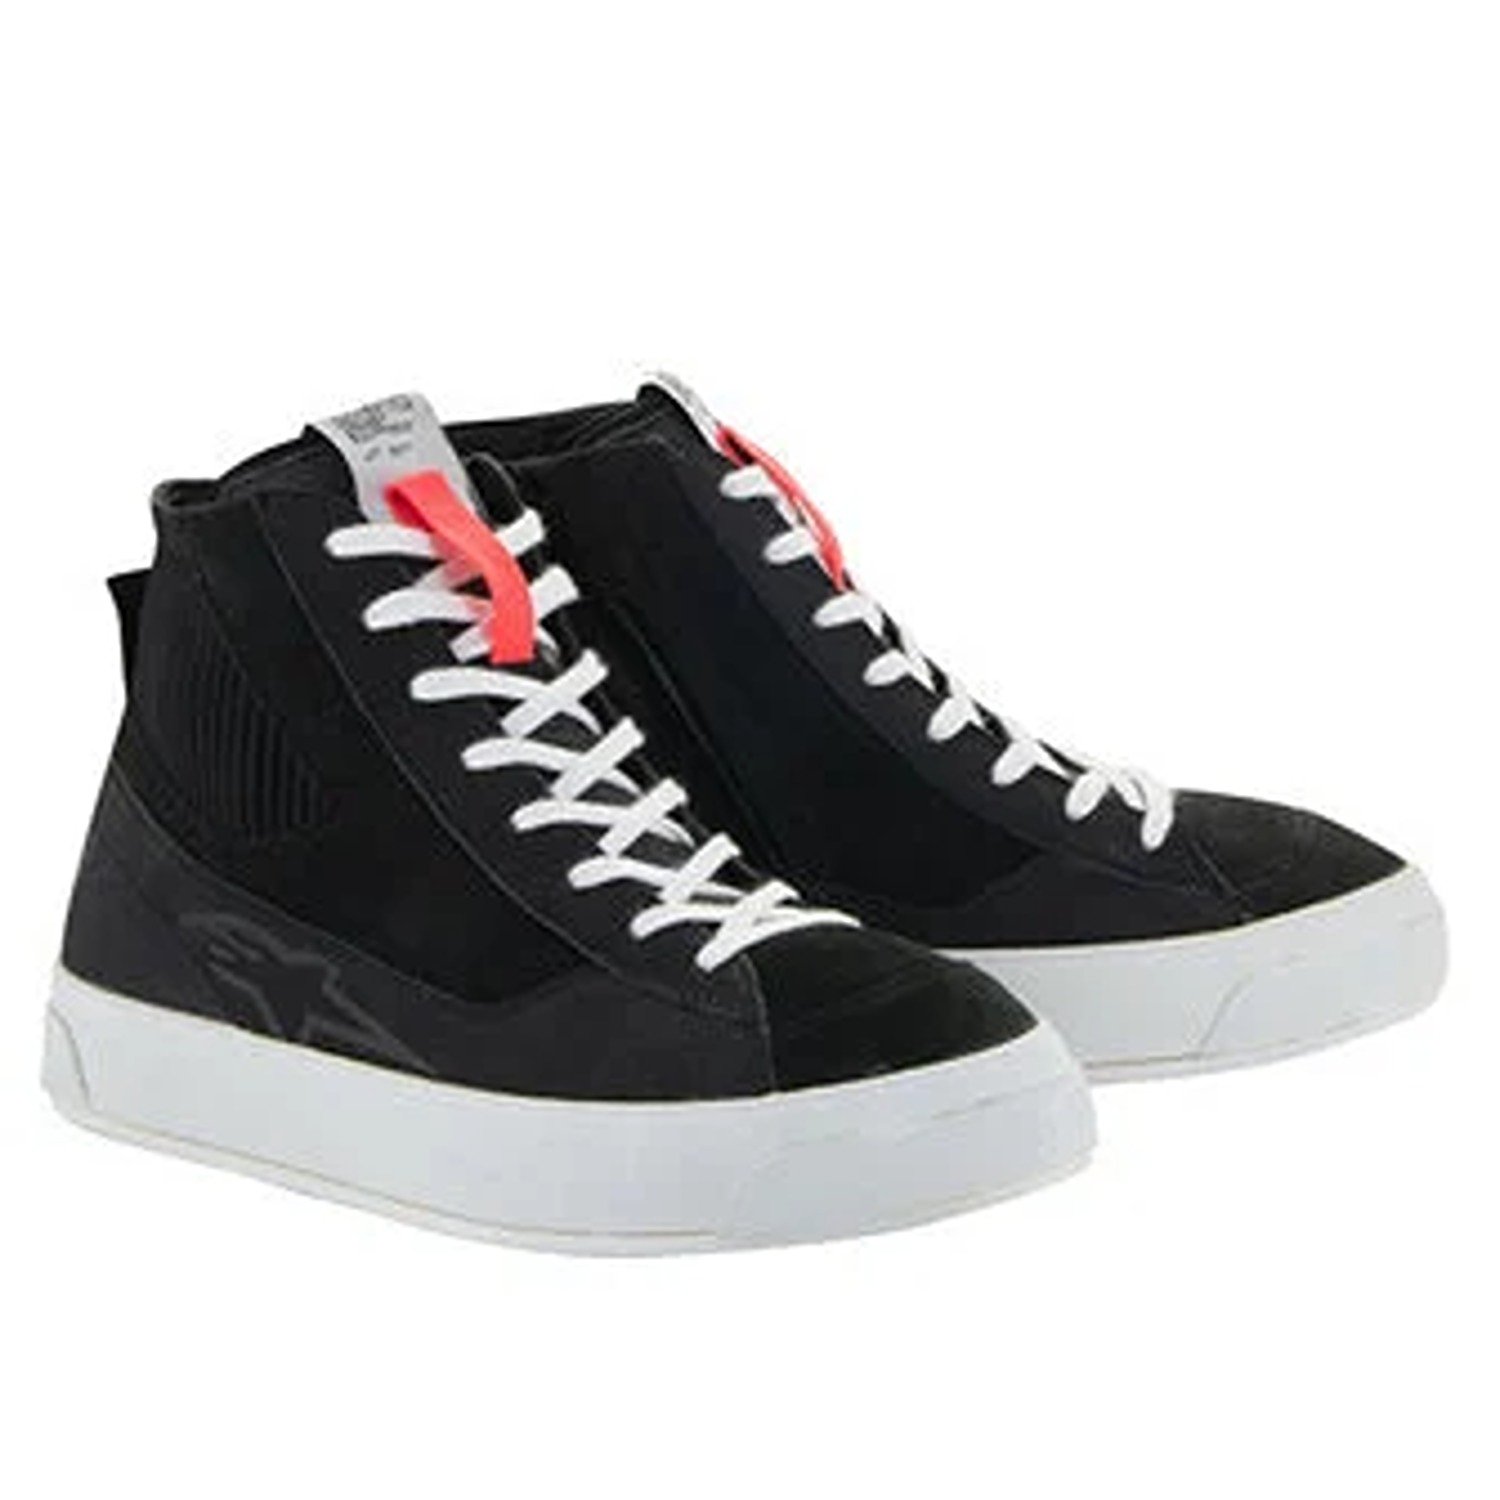 Image of EU Alpinestars Stated Shoes Black Taille US 65